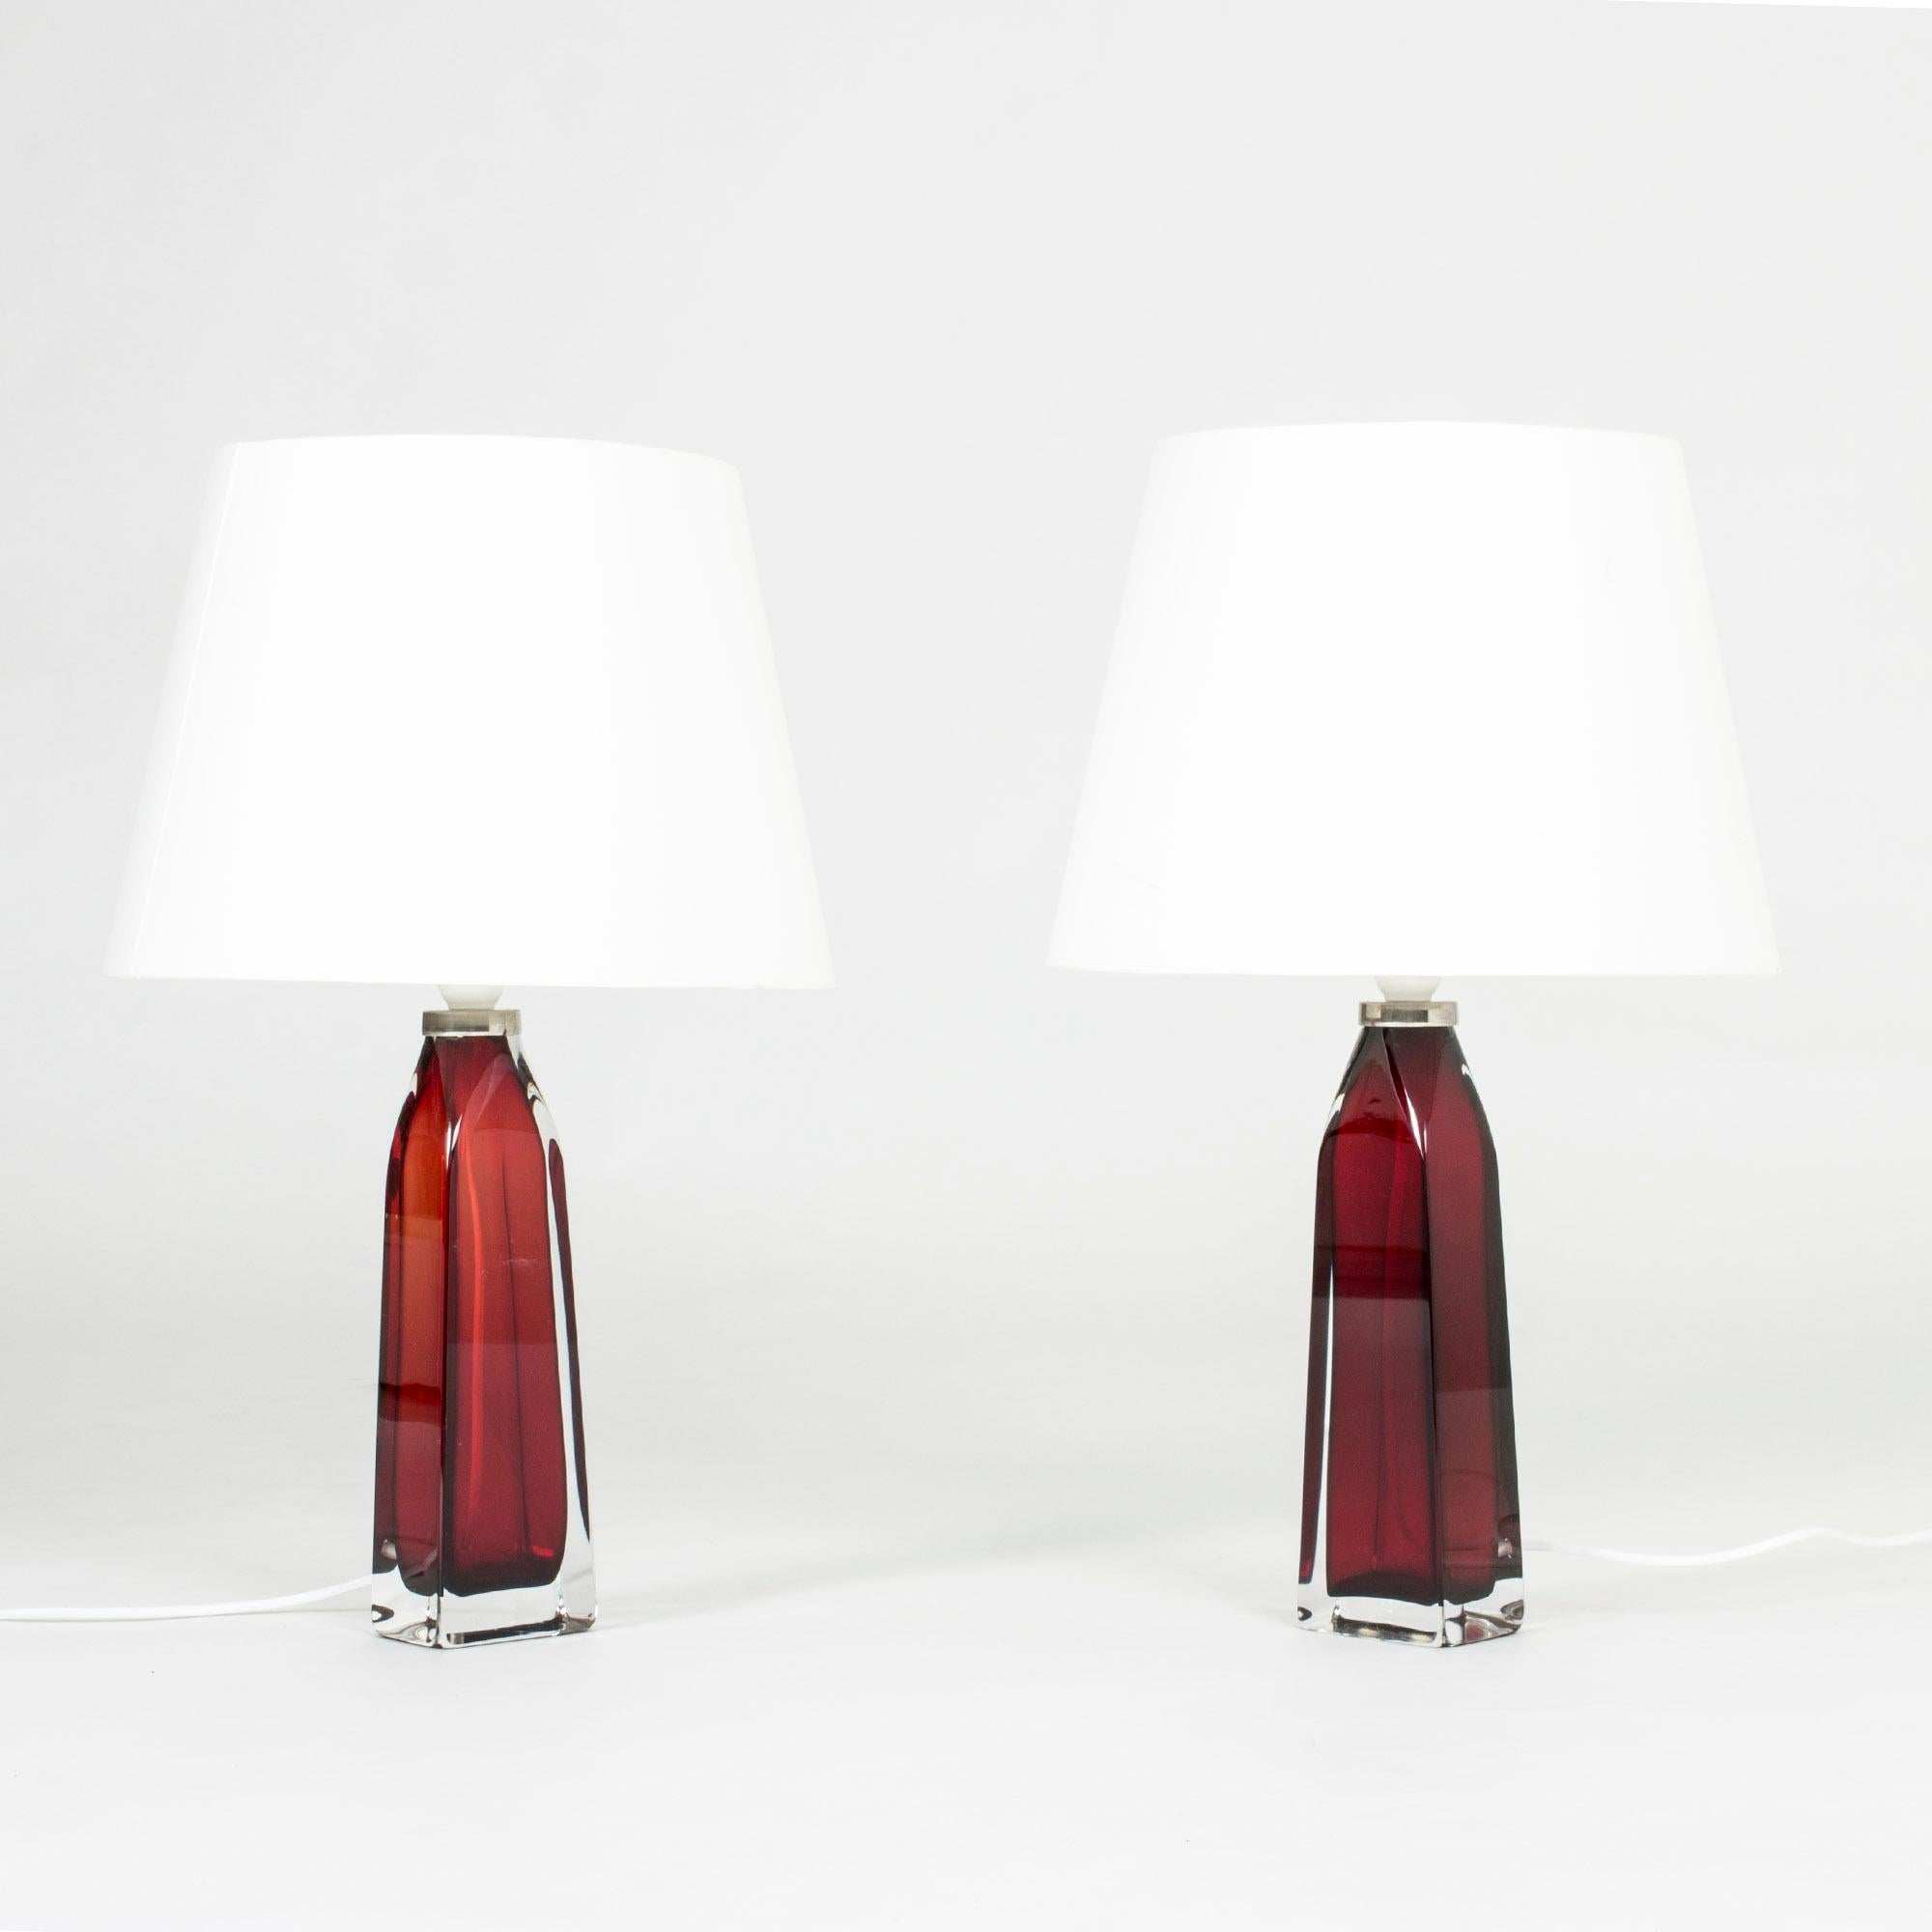 Pair of striking glass table lamps by Carl Fagerlund, made from rich red glass, rectangular at the base. Beautiful translucent color, elegant design.